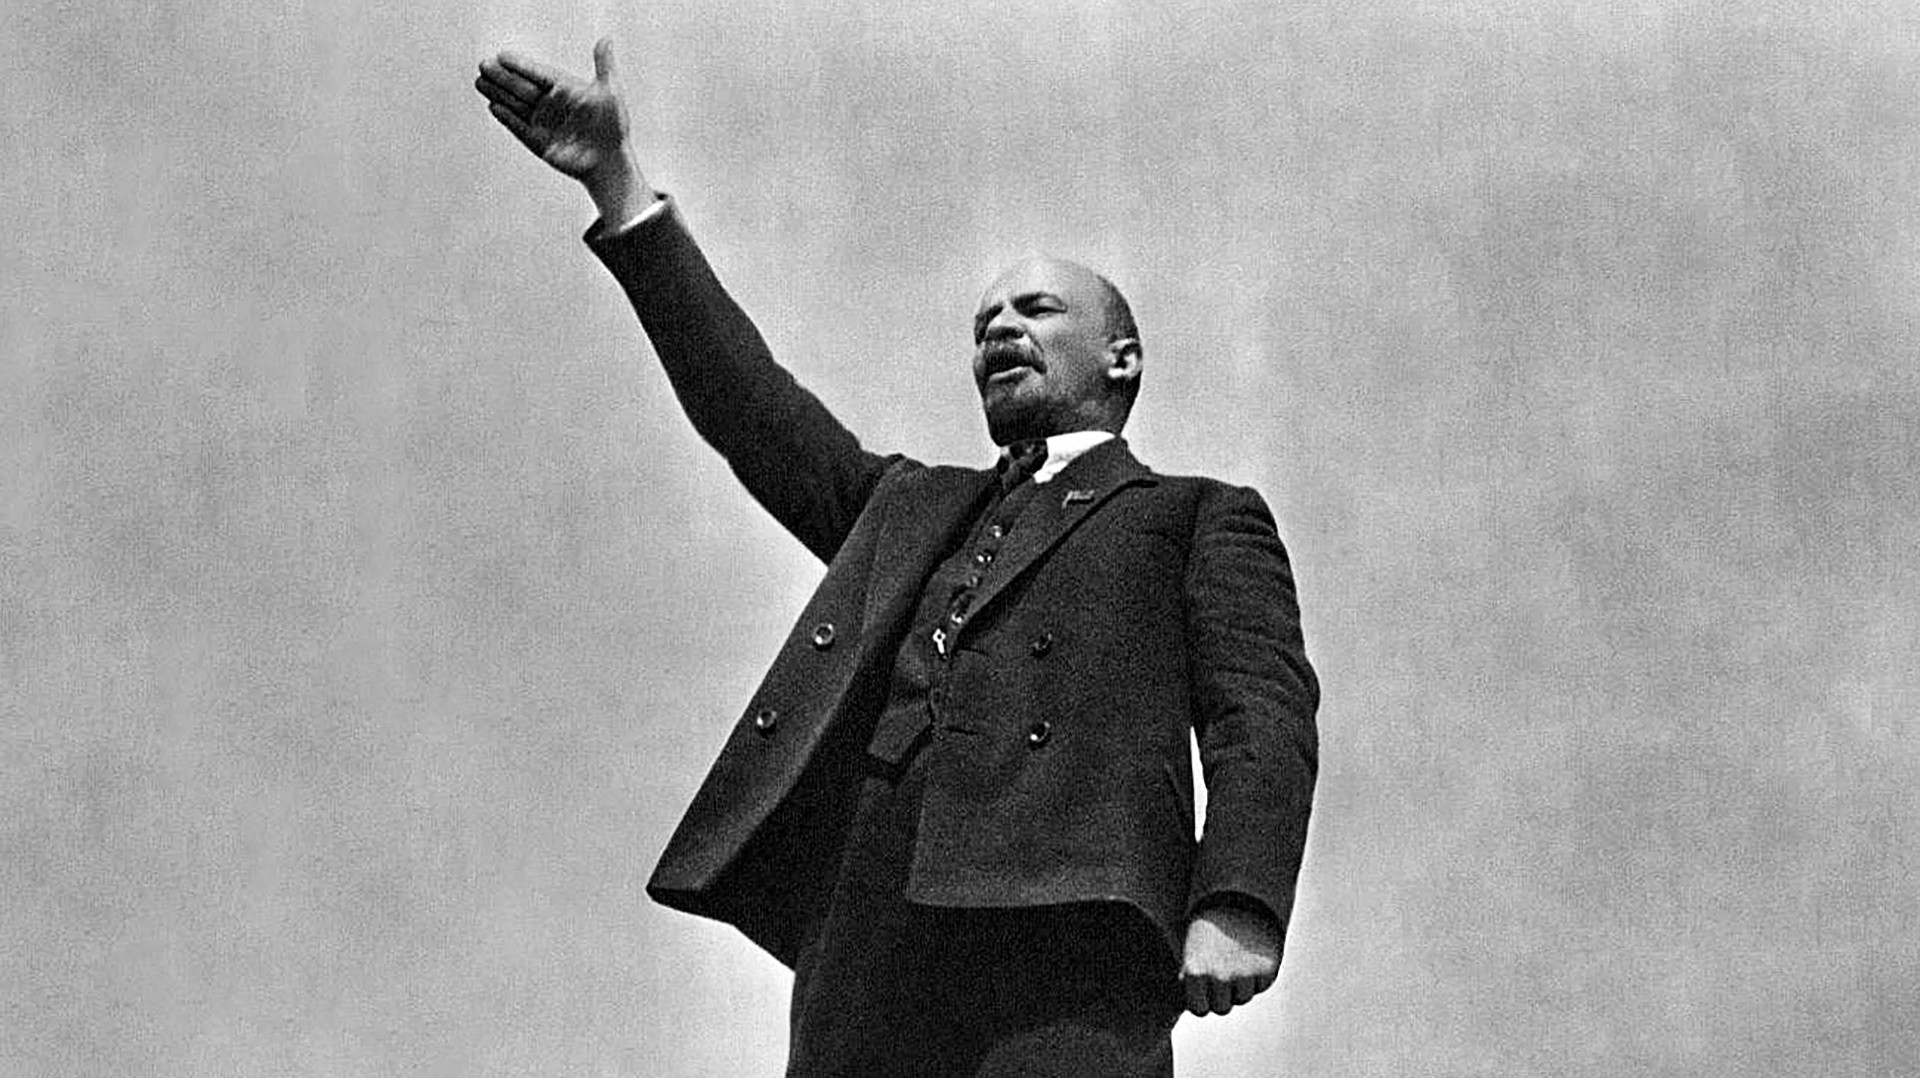 Vladimir Lenin delivering a speech at the Red Square in Moscow